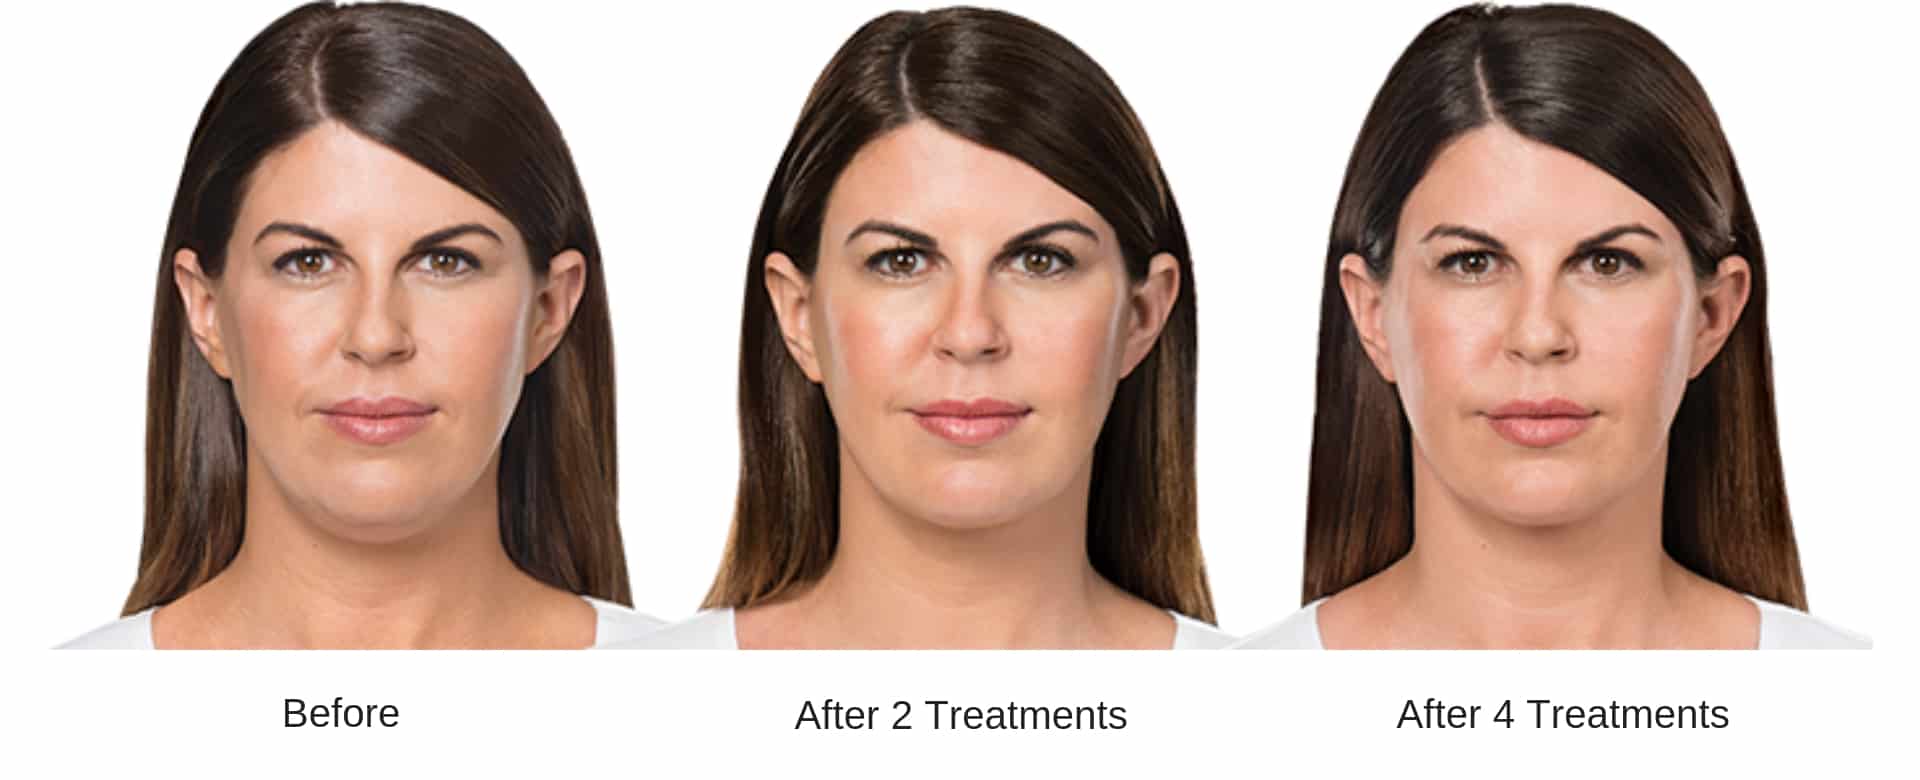 Woman's before and after Kybella treatment results.